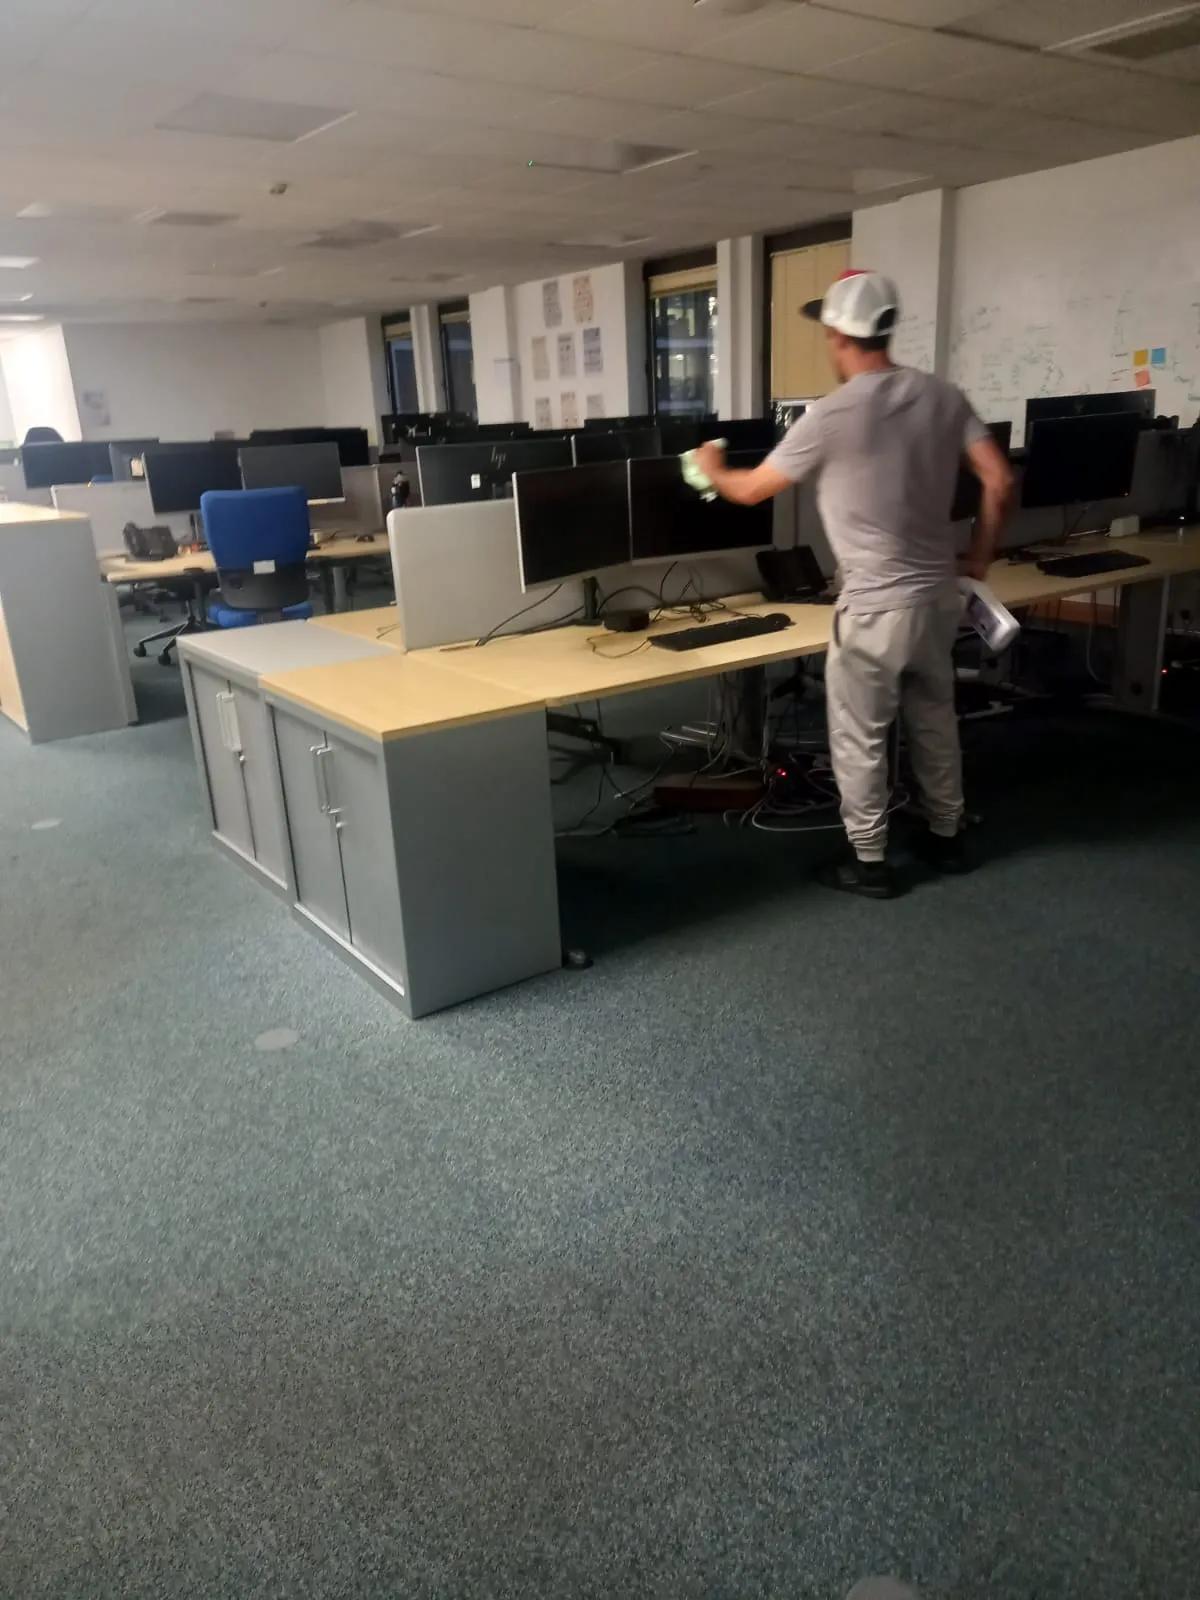 Office being cleaned by one of our team